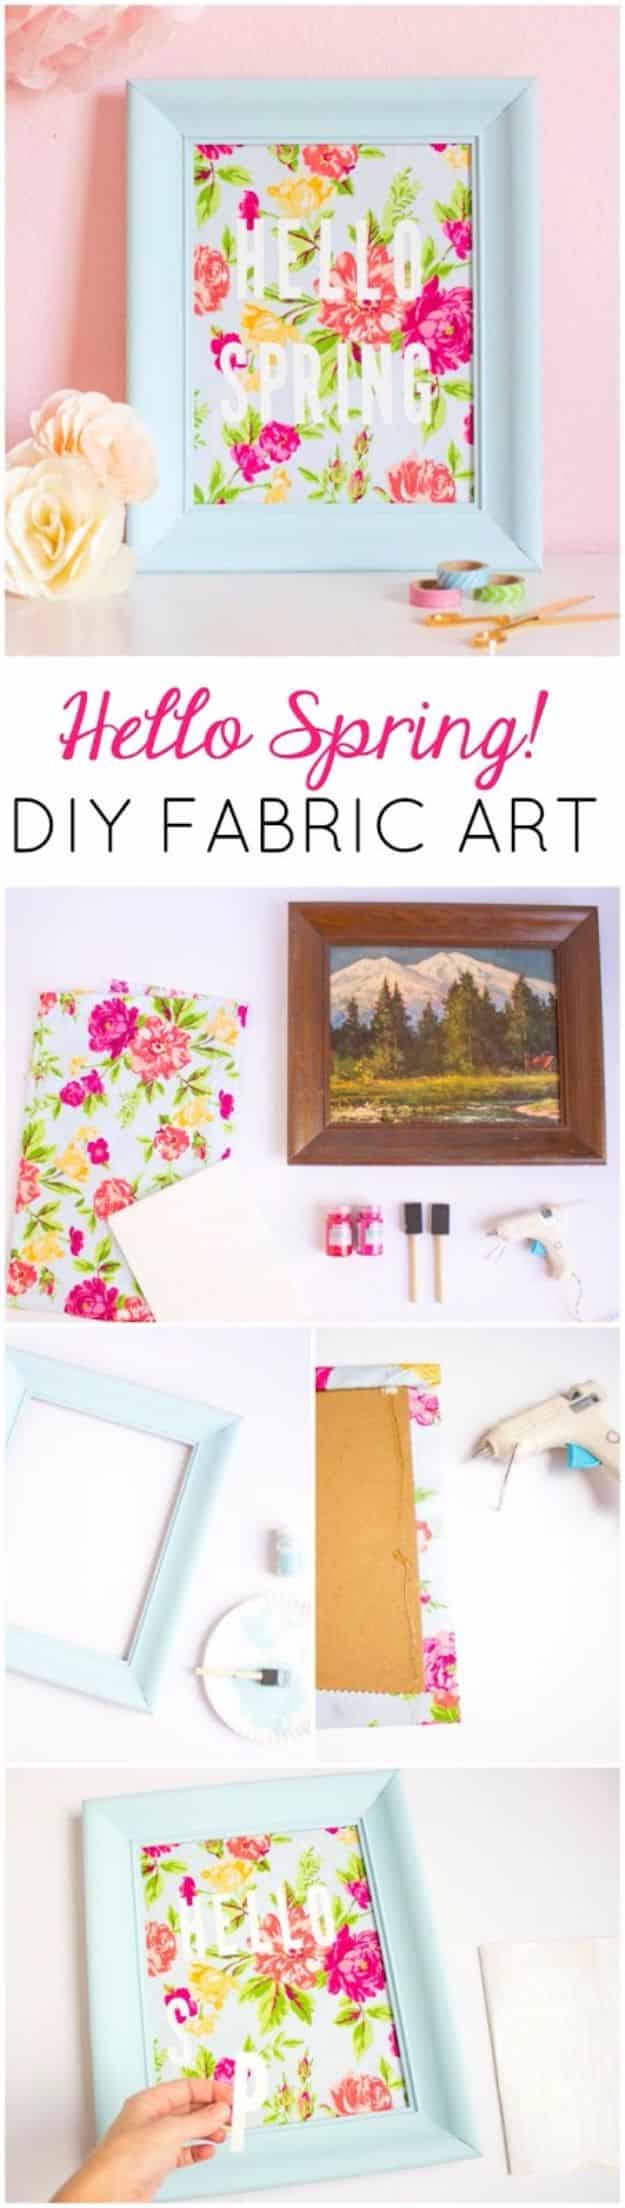 DIY Ideas With Old Picture Frames - DIY Fabric Art - Cool Crafts To Make With A Repurposed Picture Frame - Cheap Do It Yourself Gifts and Home Decor on A Budget - Fun Ideas for Decorating Your House and Room 